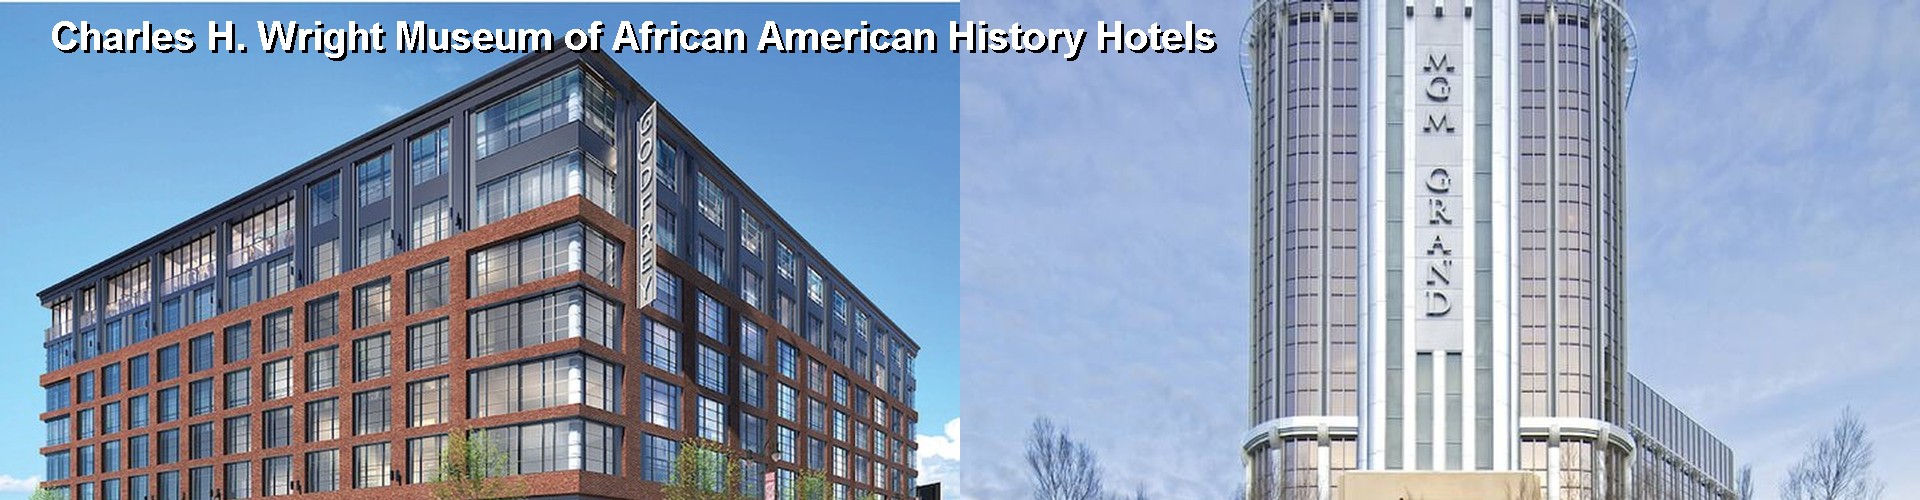 5 Best Hotels near Charles H. Wright Museum of African American History